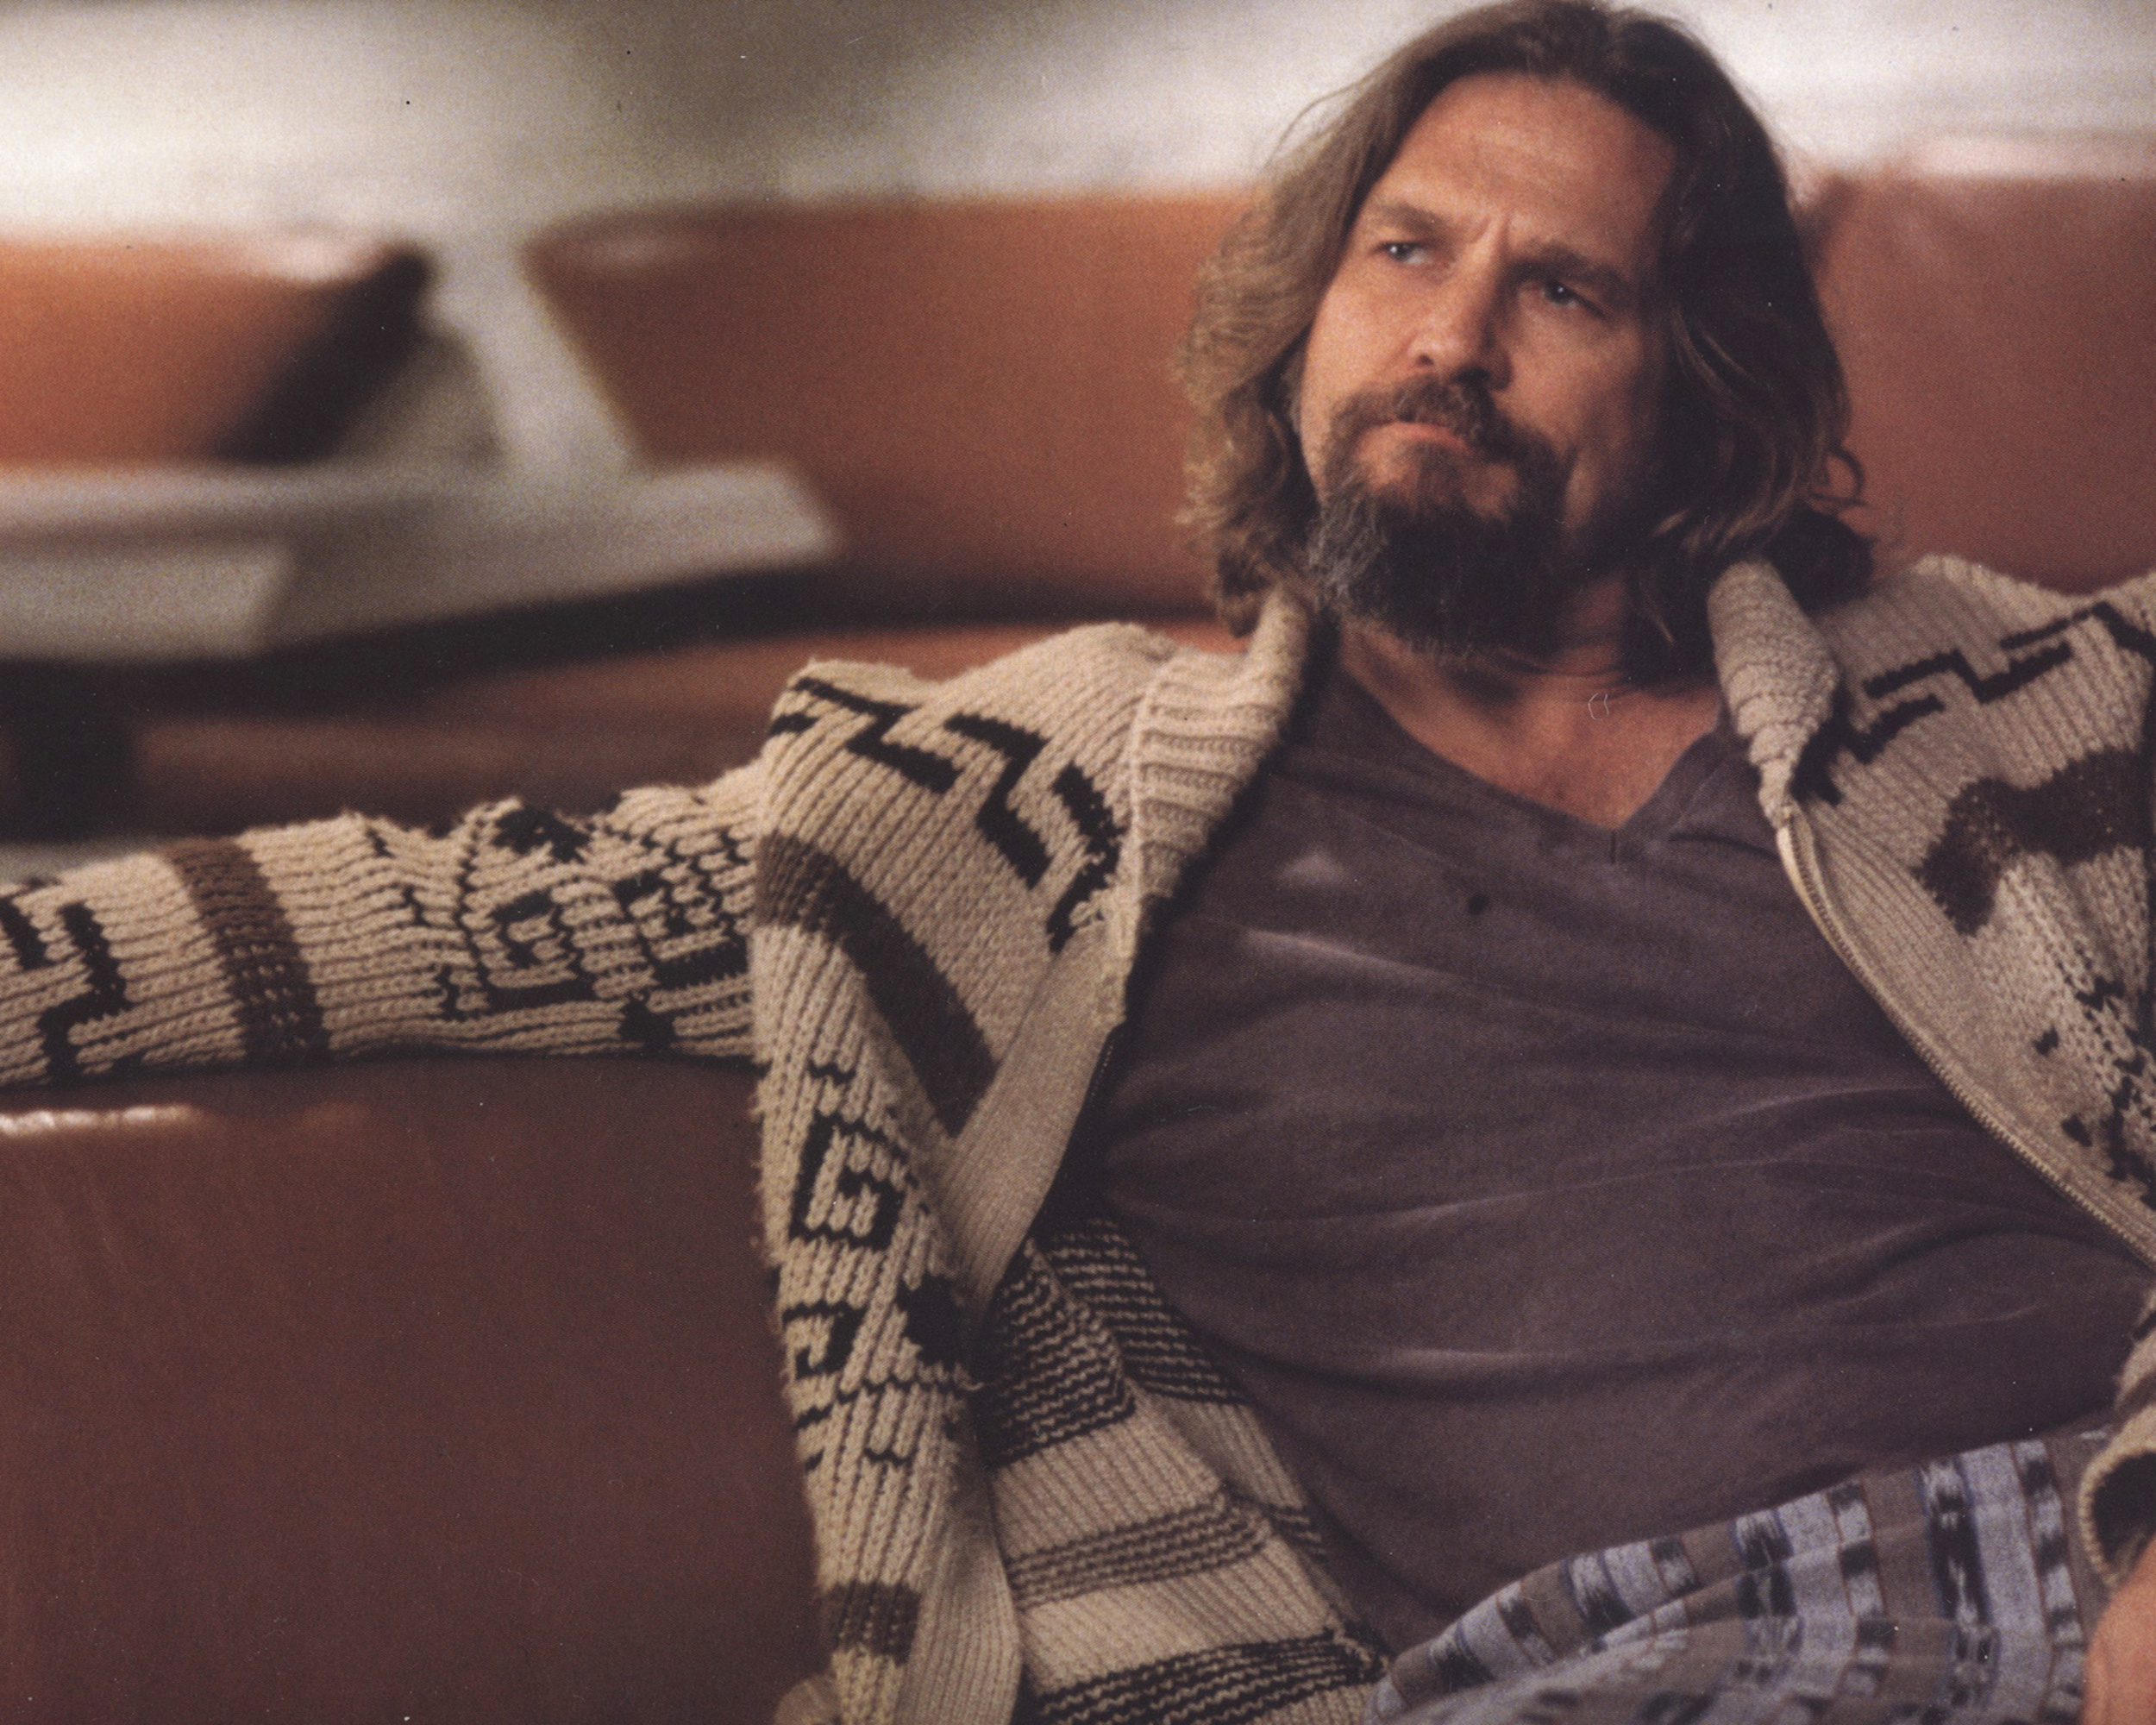 <p>Now, and likely forever, this is Bridges’ defining role. Oddly, <em>The Big Lebowski</em> was not necessarily a success when it was released. Then, it became a cult classic. Then, it became <em>the </em>cult classic. Bridges turn as The Dude has come to color our perception of Bridges even off of the screen. He seems like The Dude, or maybe we just want him to be The Dude, because we love The Dude. Or El Duderino, if you aren’t into the whole brevity thing.</p><p>You may also like: <a href='https://www.yardbarker.com/entertainment/articles/25_best_picture_winners_you_may_not_have_seen/s1__38588379'>25 Best Picture winners you may not have seen</a></p>